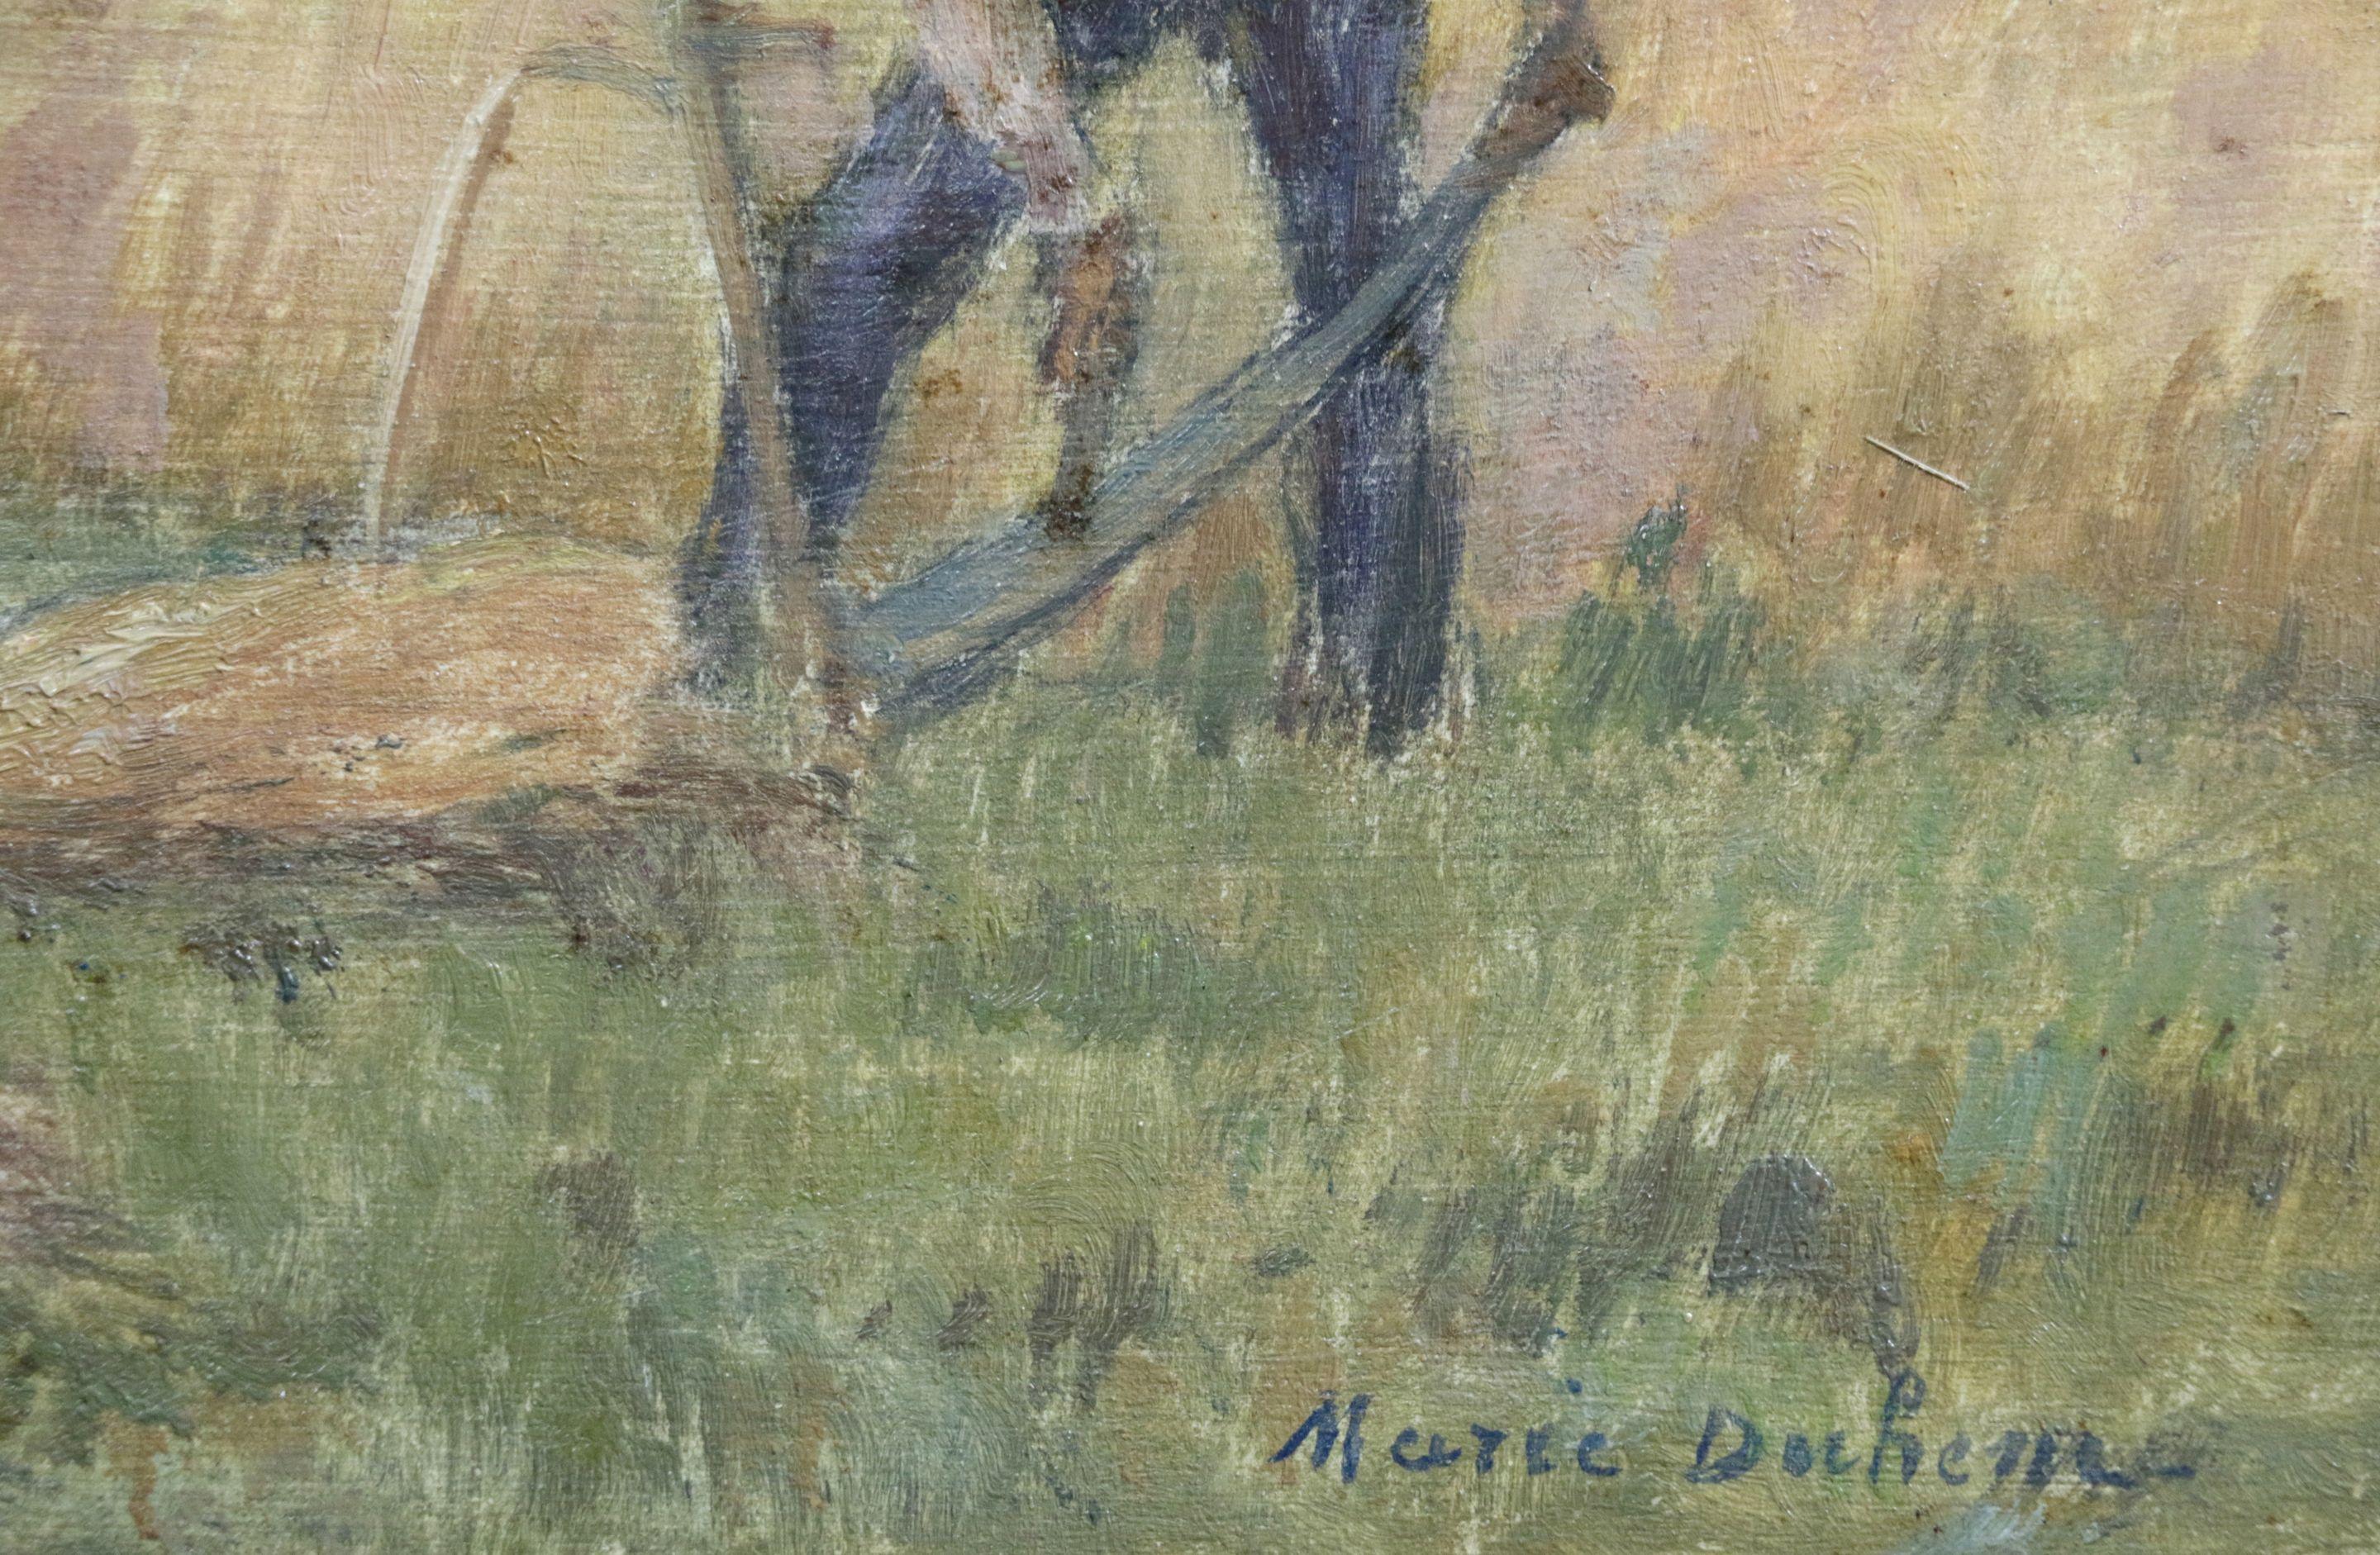 Oil on panel. Signed lower right and dated 1903 verso. This painting is not currently framed but a suitable frame can be sourced if required.

Marie Duhem, was born in Guemps on March 18, 1871 and died in Douai on July 9, 1918.
 
Marie Duhem's